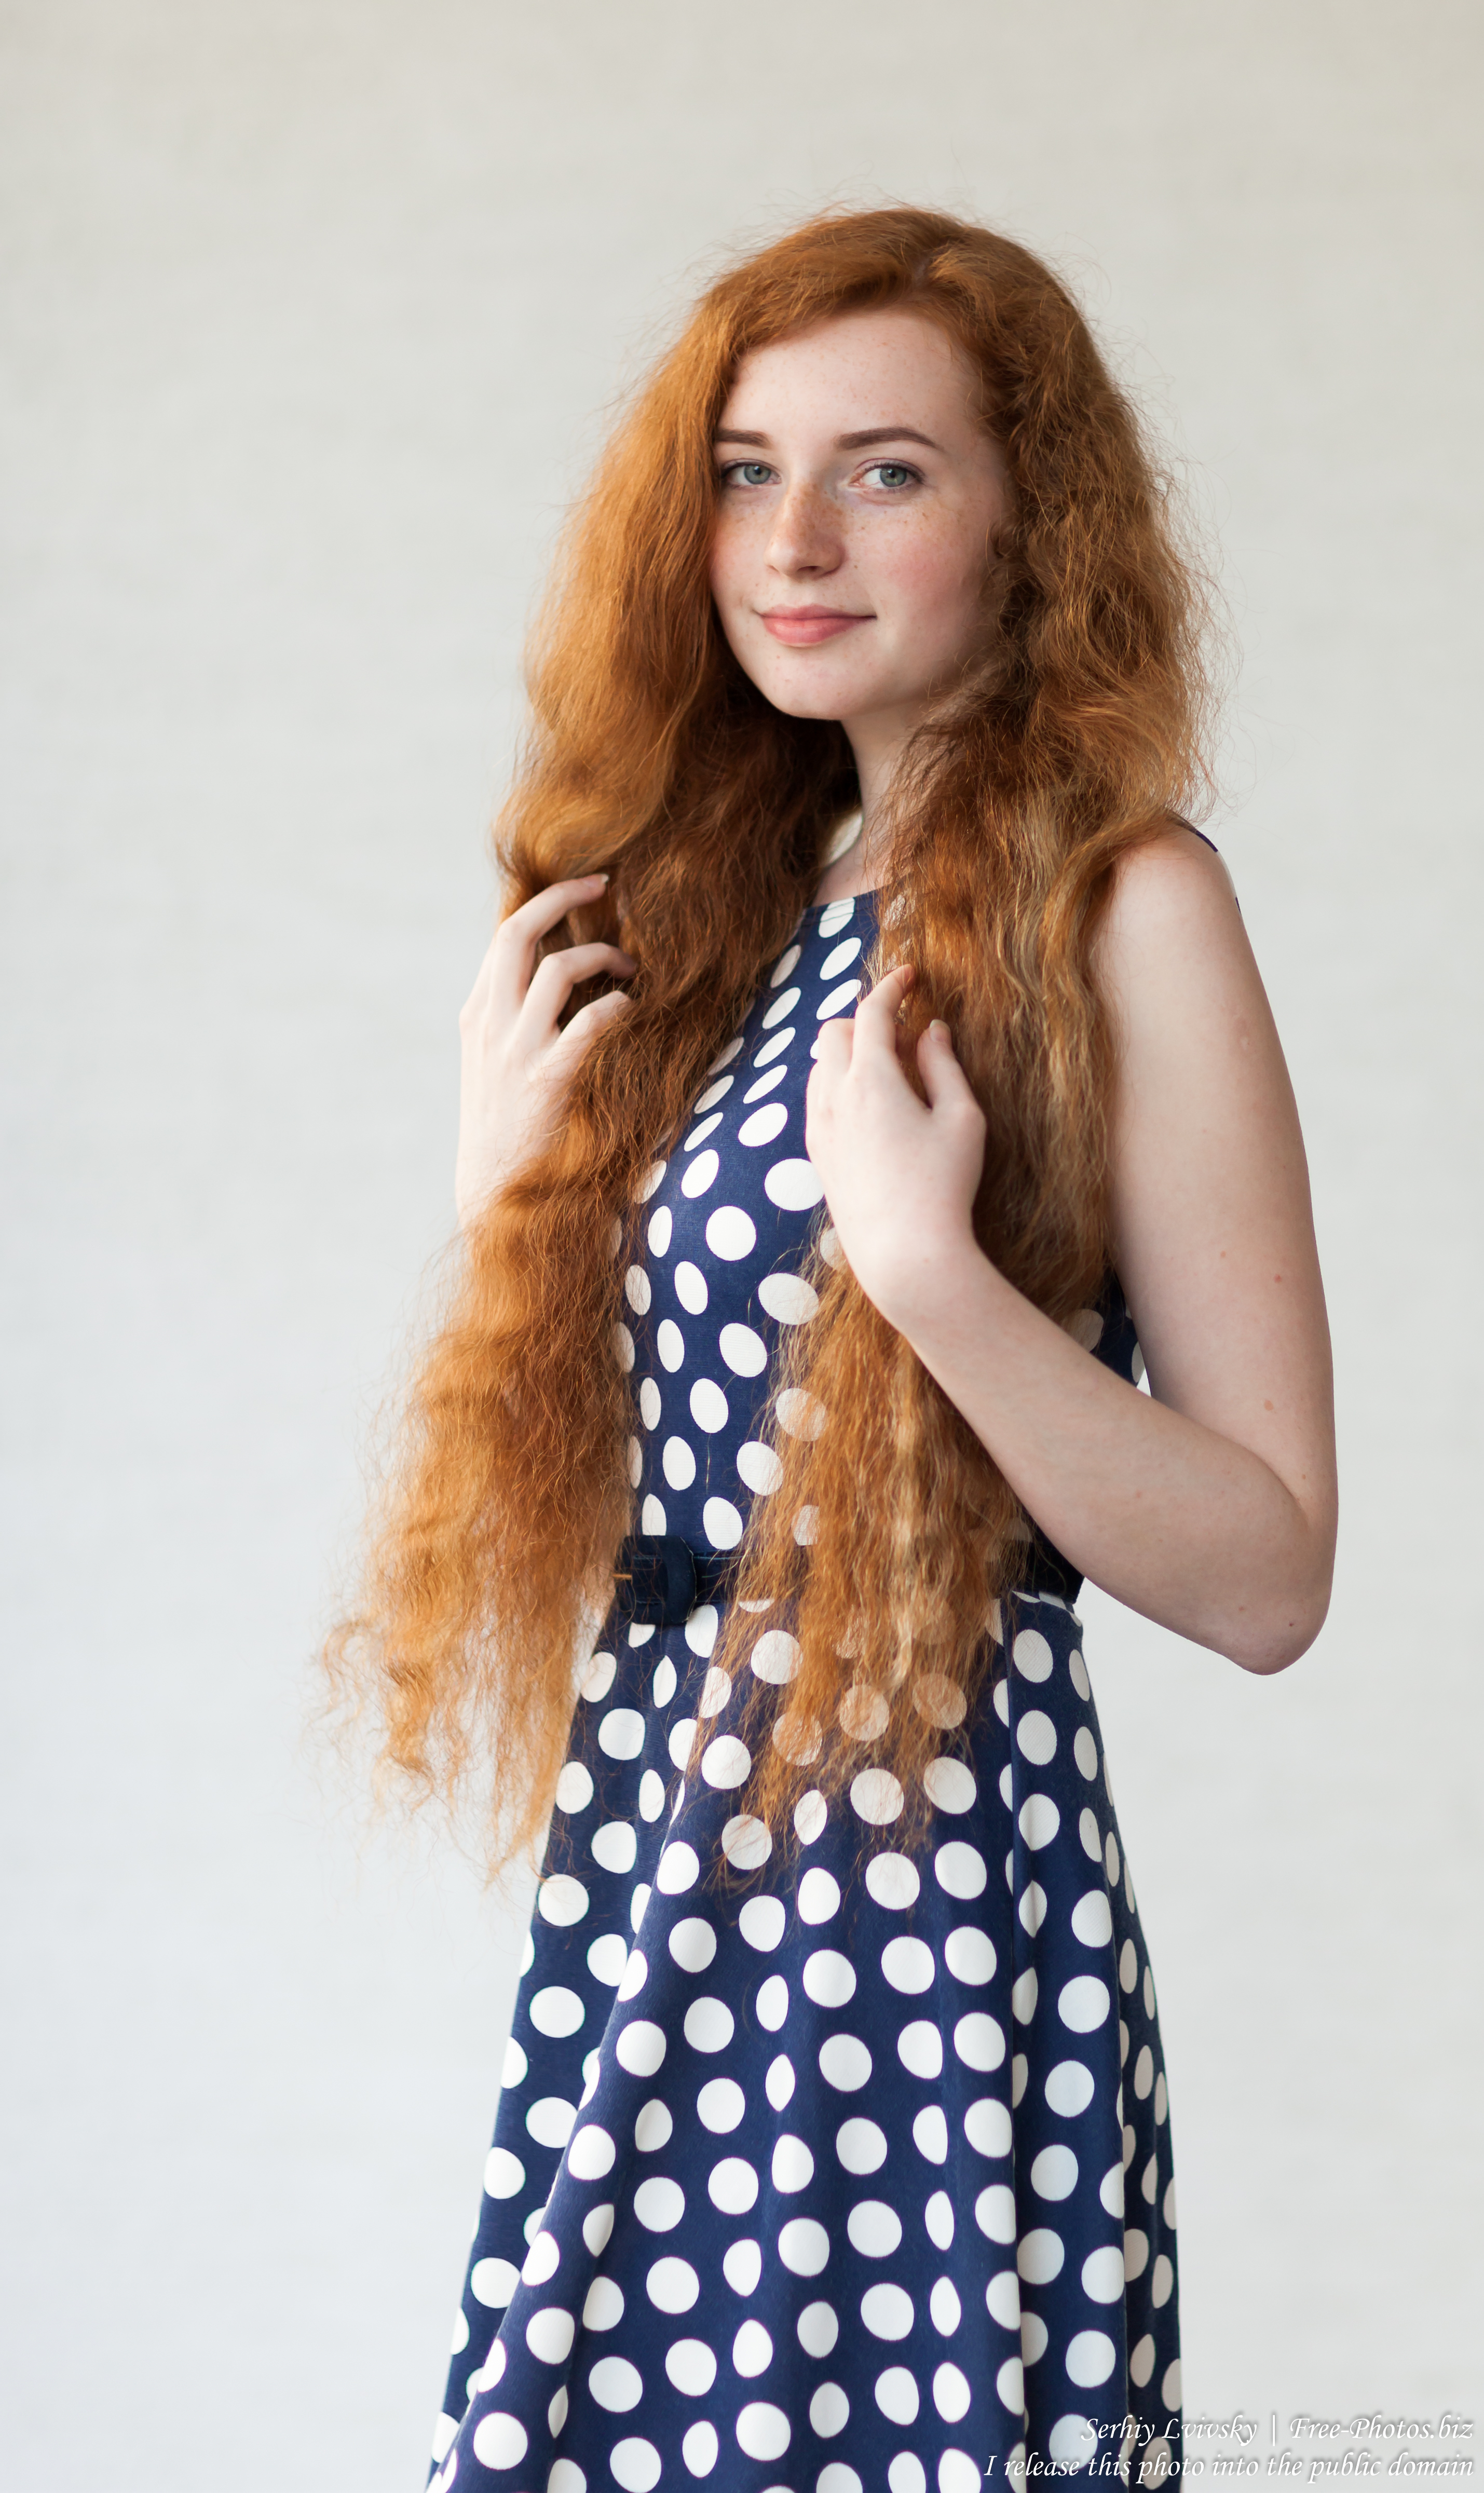 Ania - a 19-year-old natural red-haired girl photographed in June 2017 by Serhiy Lvivsky, picture 14